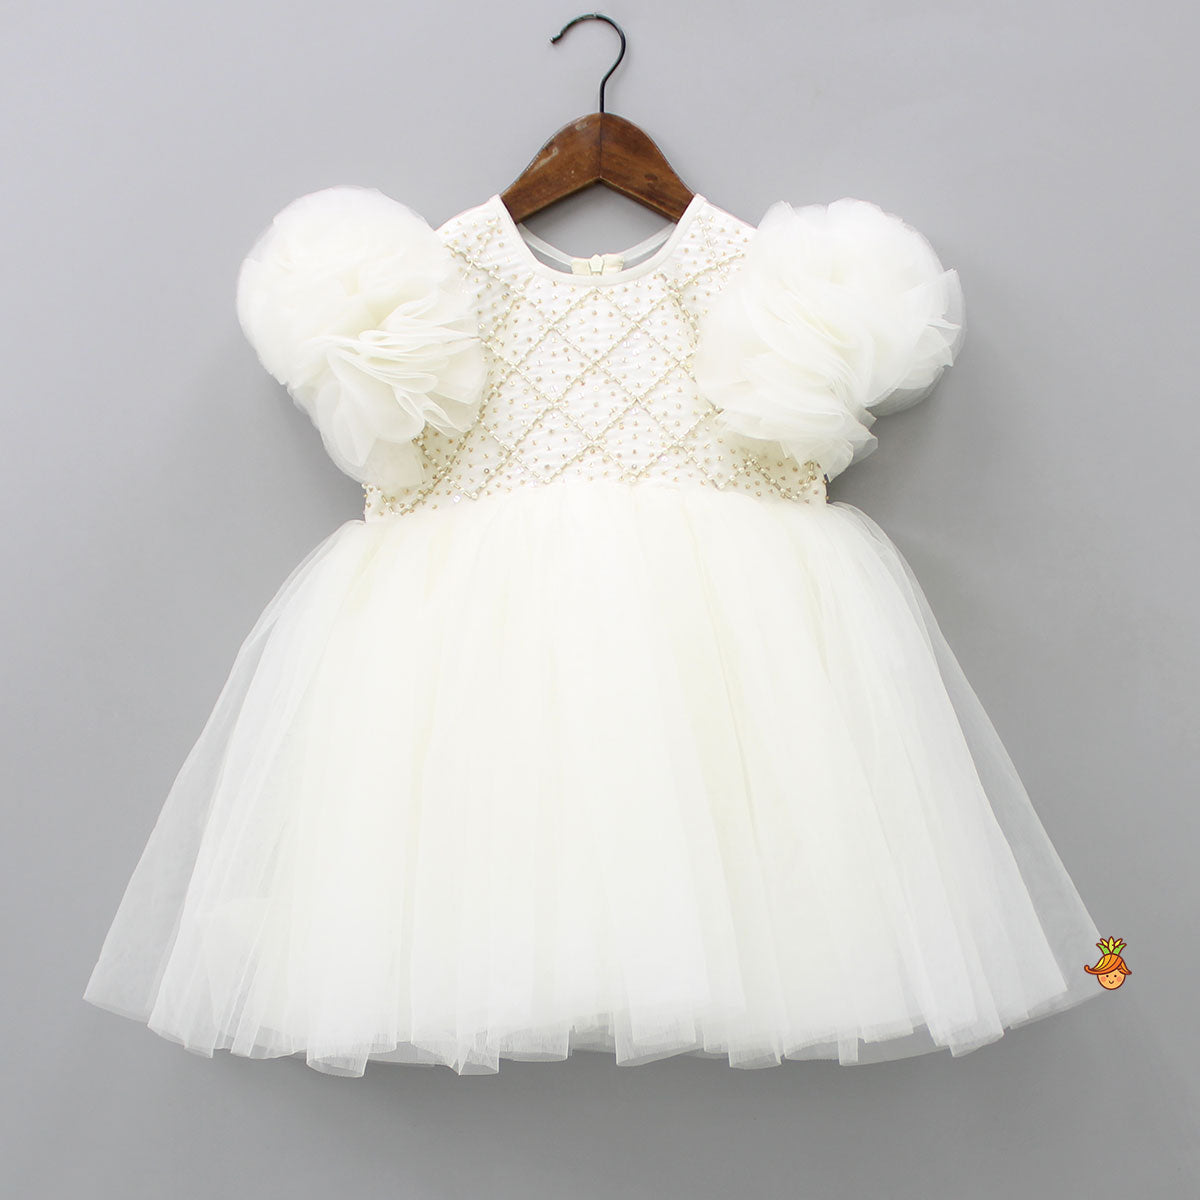 Pre Order: Checks Embroidered Yoke Off White Dress With Back Sequined Bow